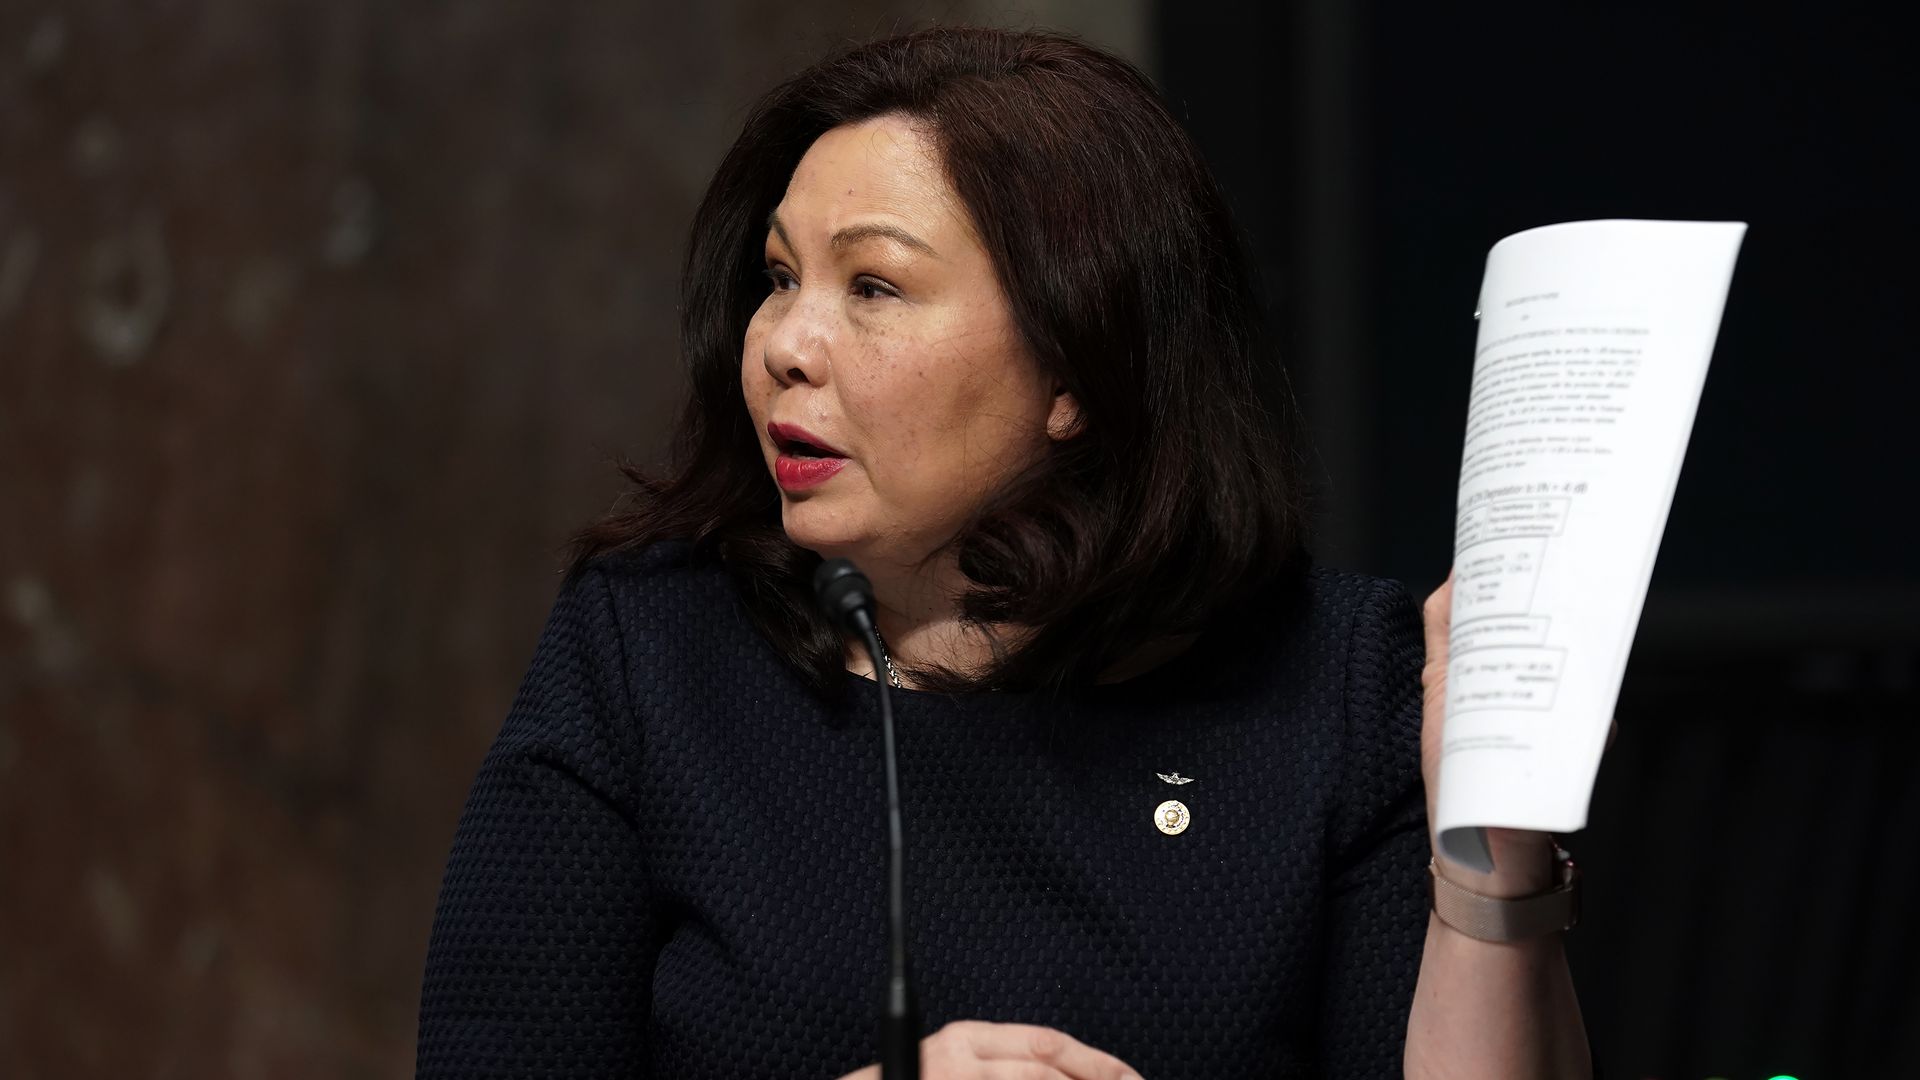 Sen. Tammy Duckworth holds a paper while speaking at a Congressional hearing